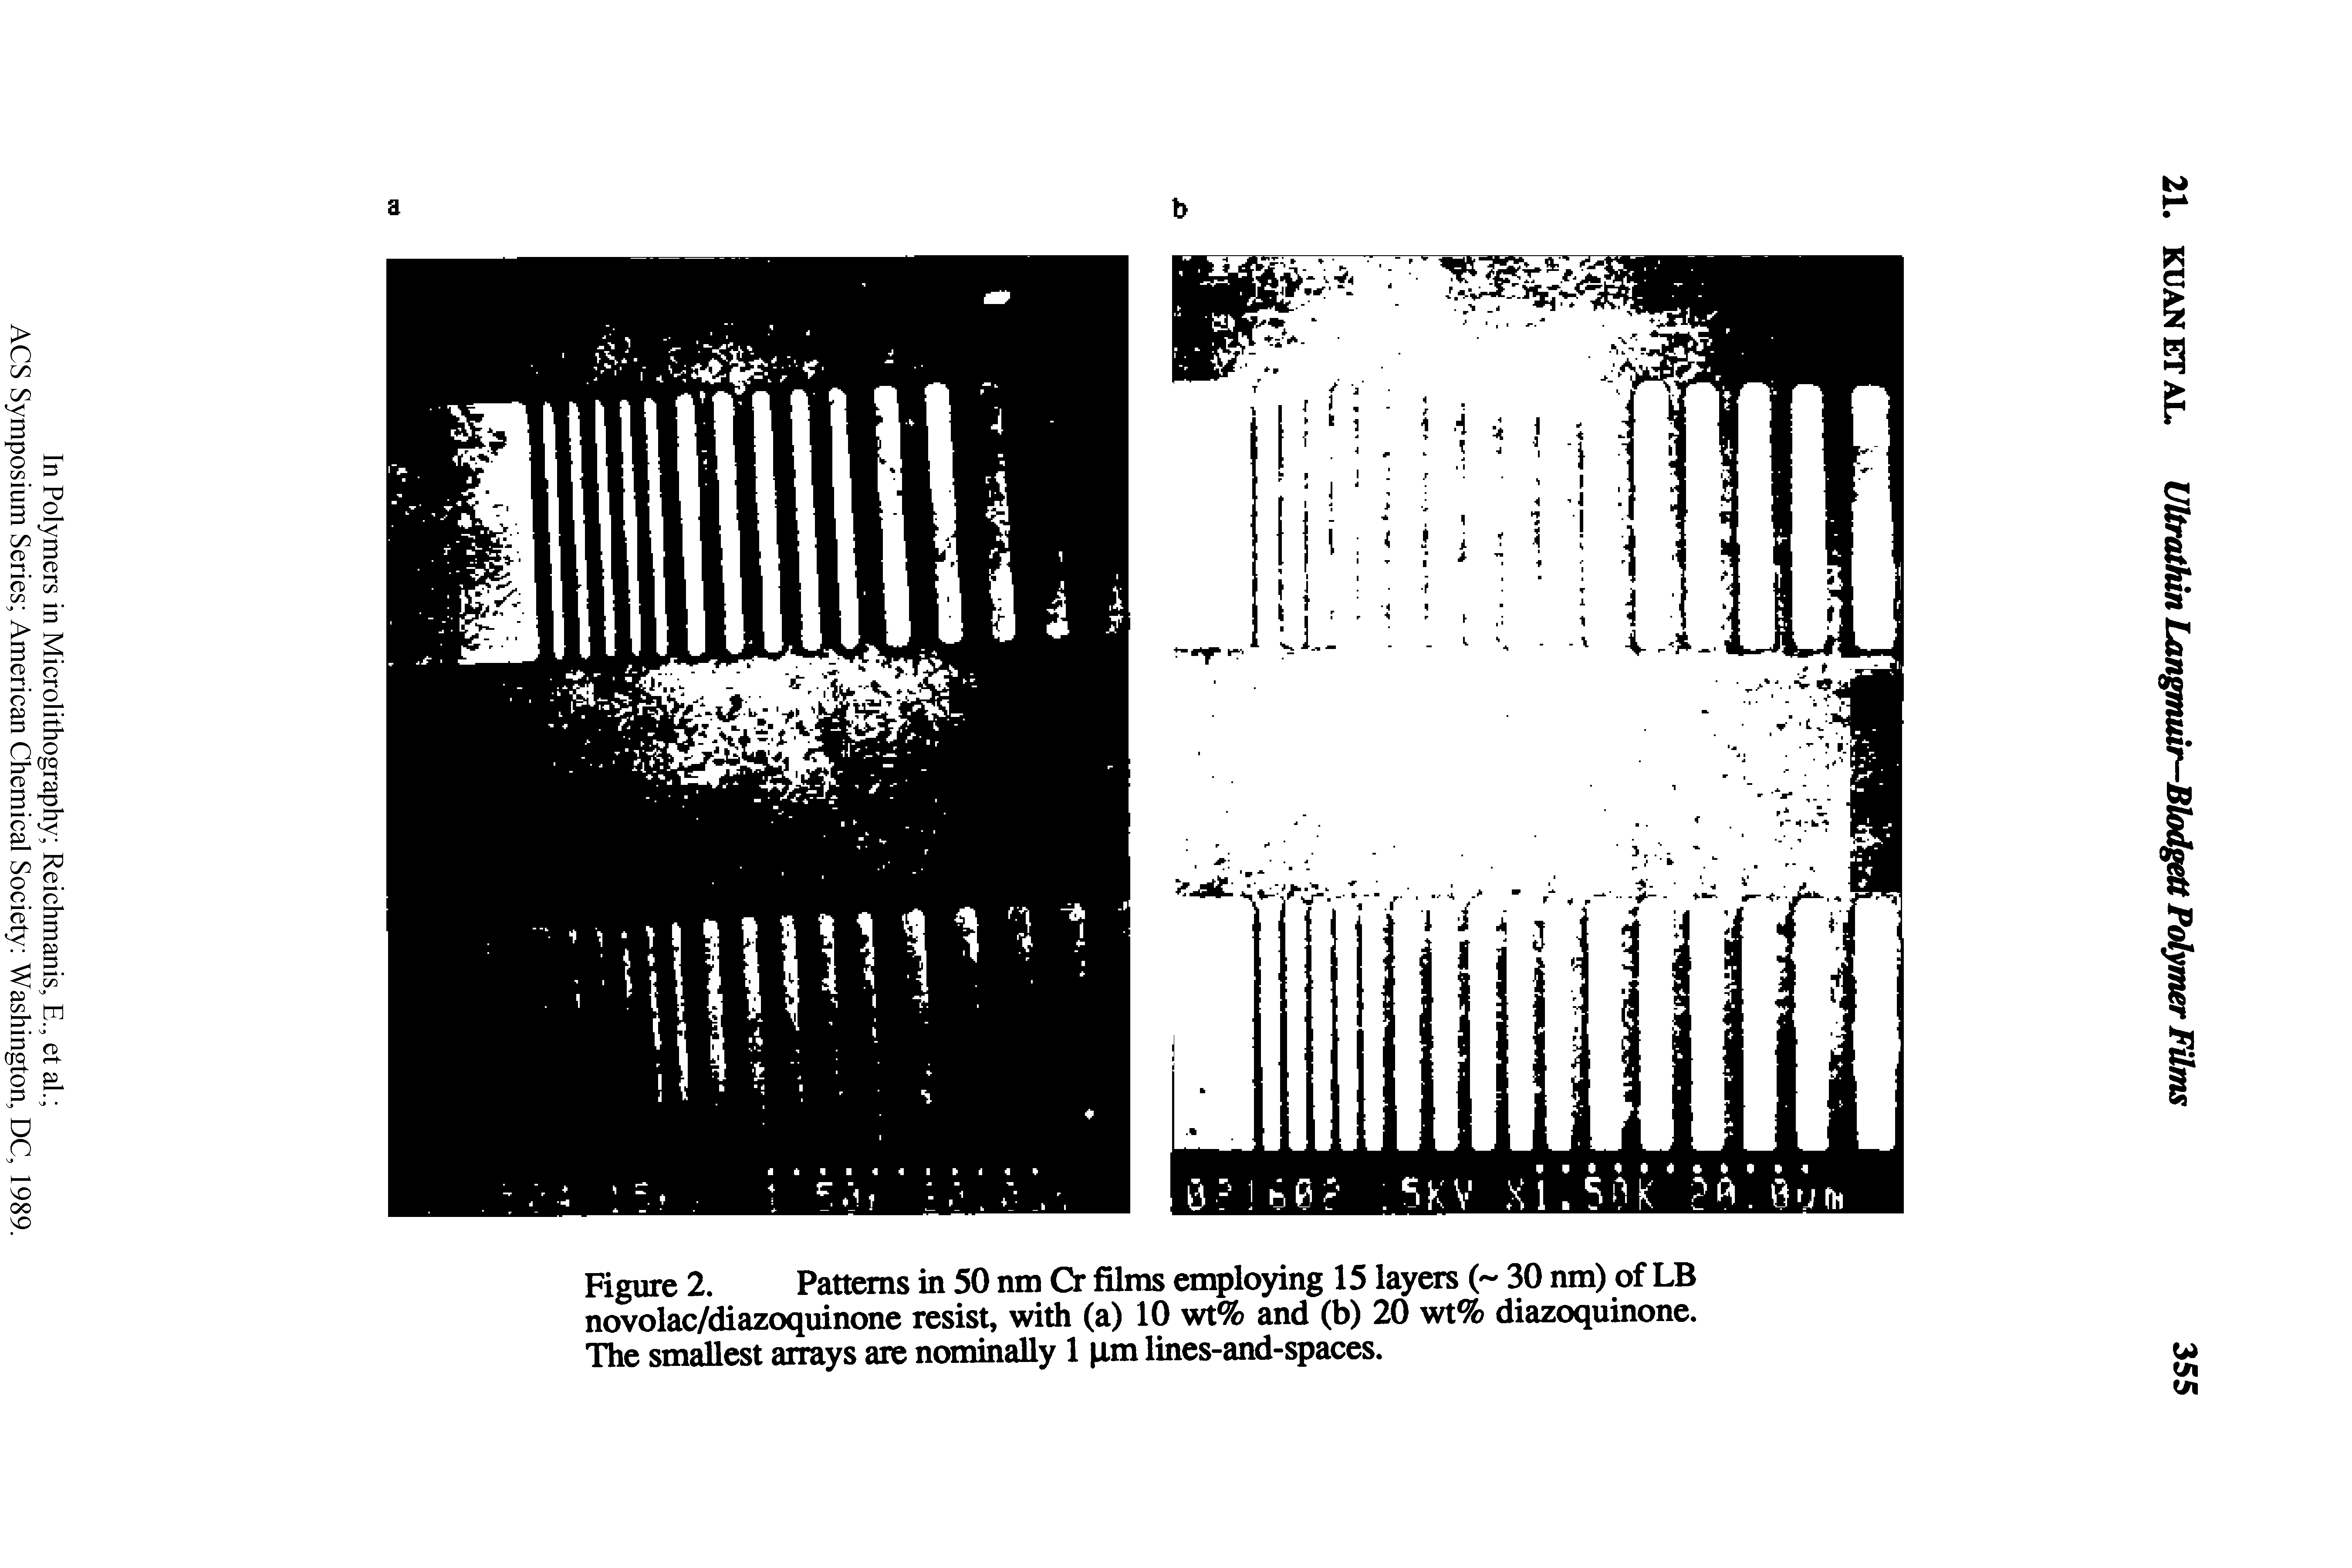 Figure 2. Patterns in 50 nm Cr films employing 15 layers ( 30 nm) of LB novolac/diazoquinone resist, with (a) 10 wt% and (b) 20 wt% diazoquinone. The smallest arrays are nominally 1 pm lines-and-spaces.